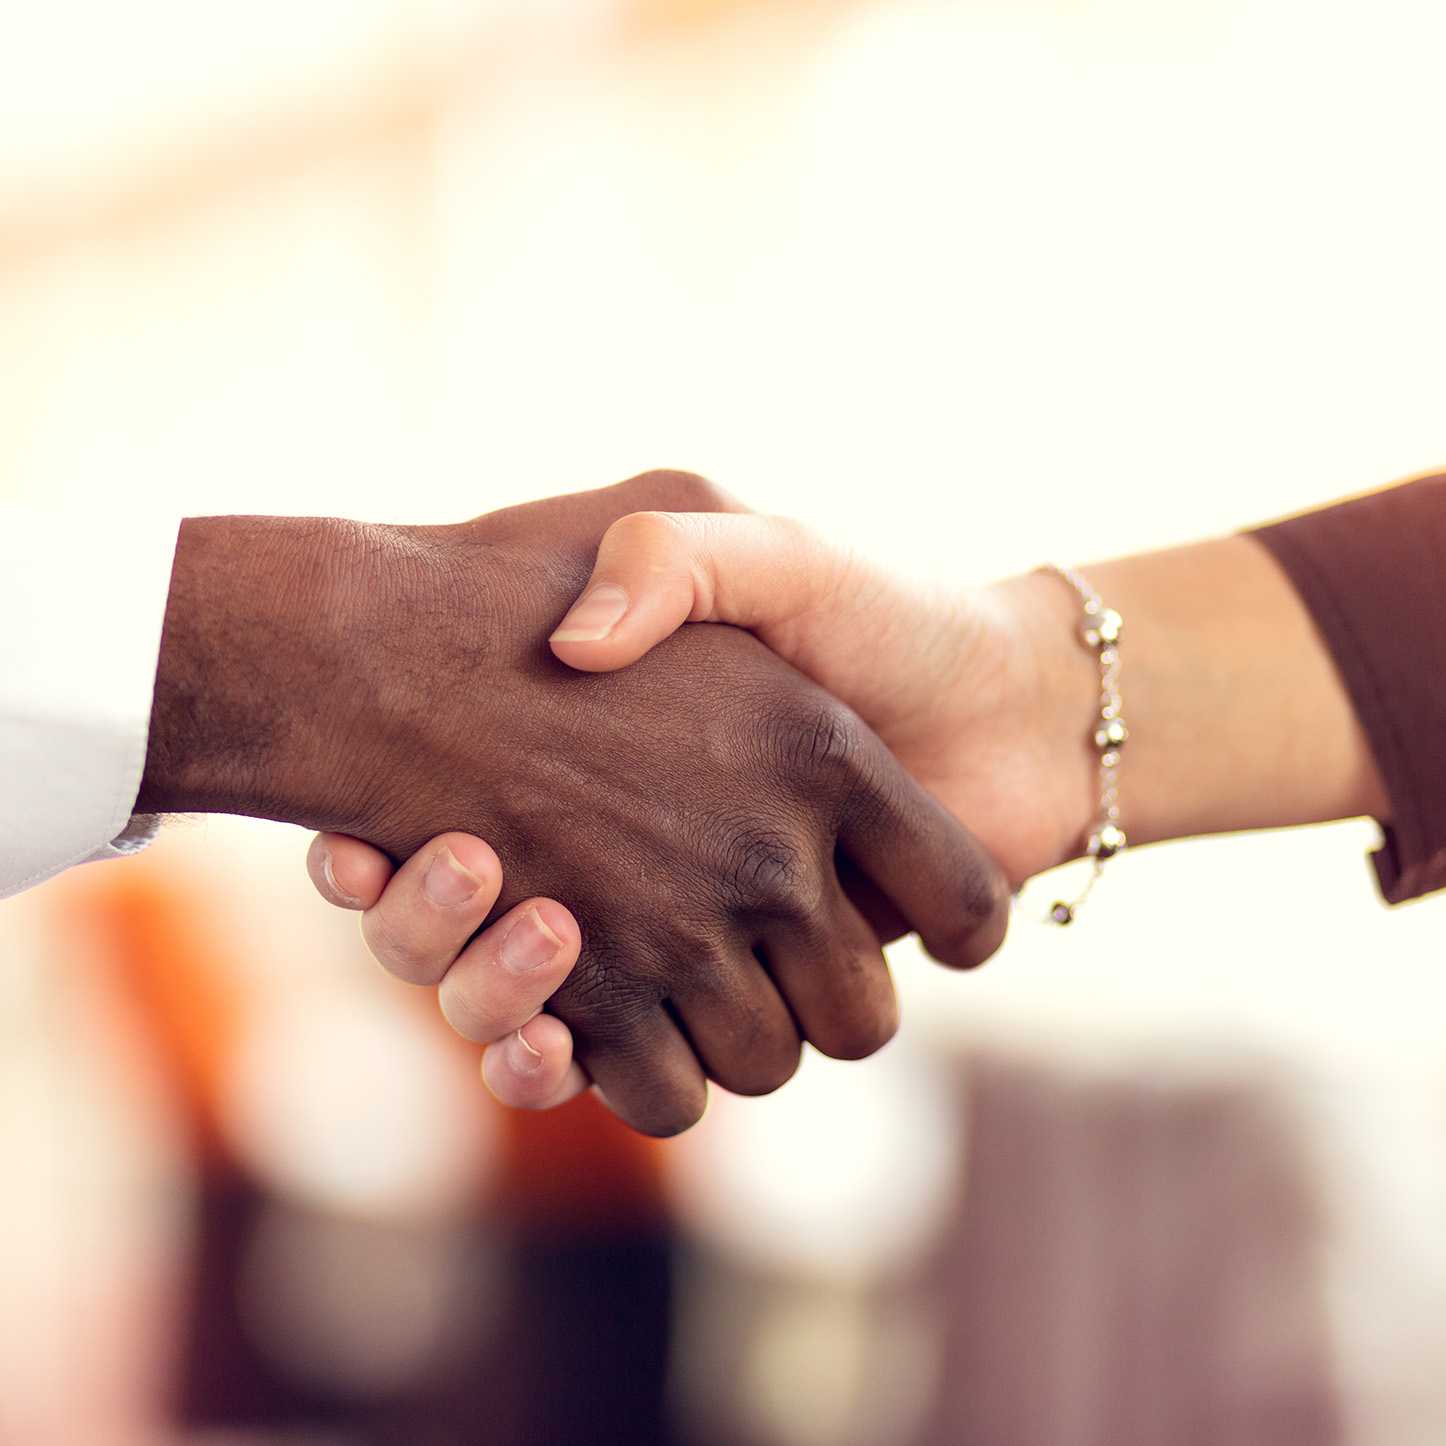 Closeup of White and Black shaking hands over a deal.